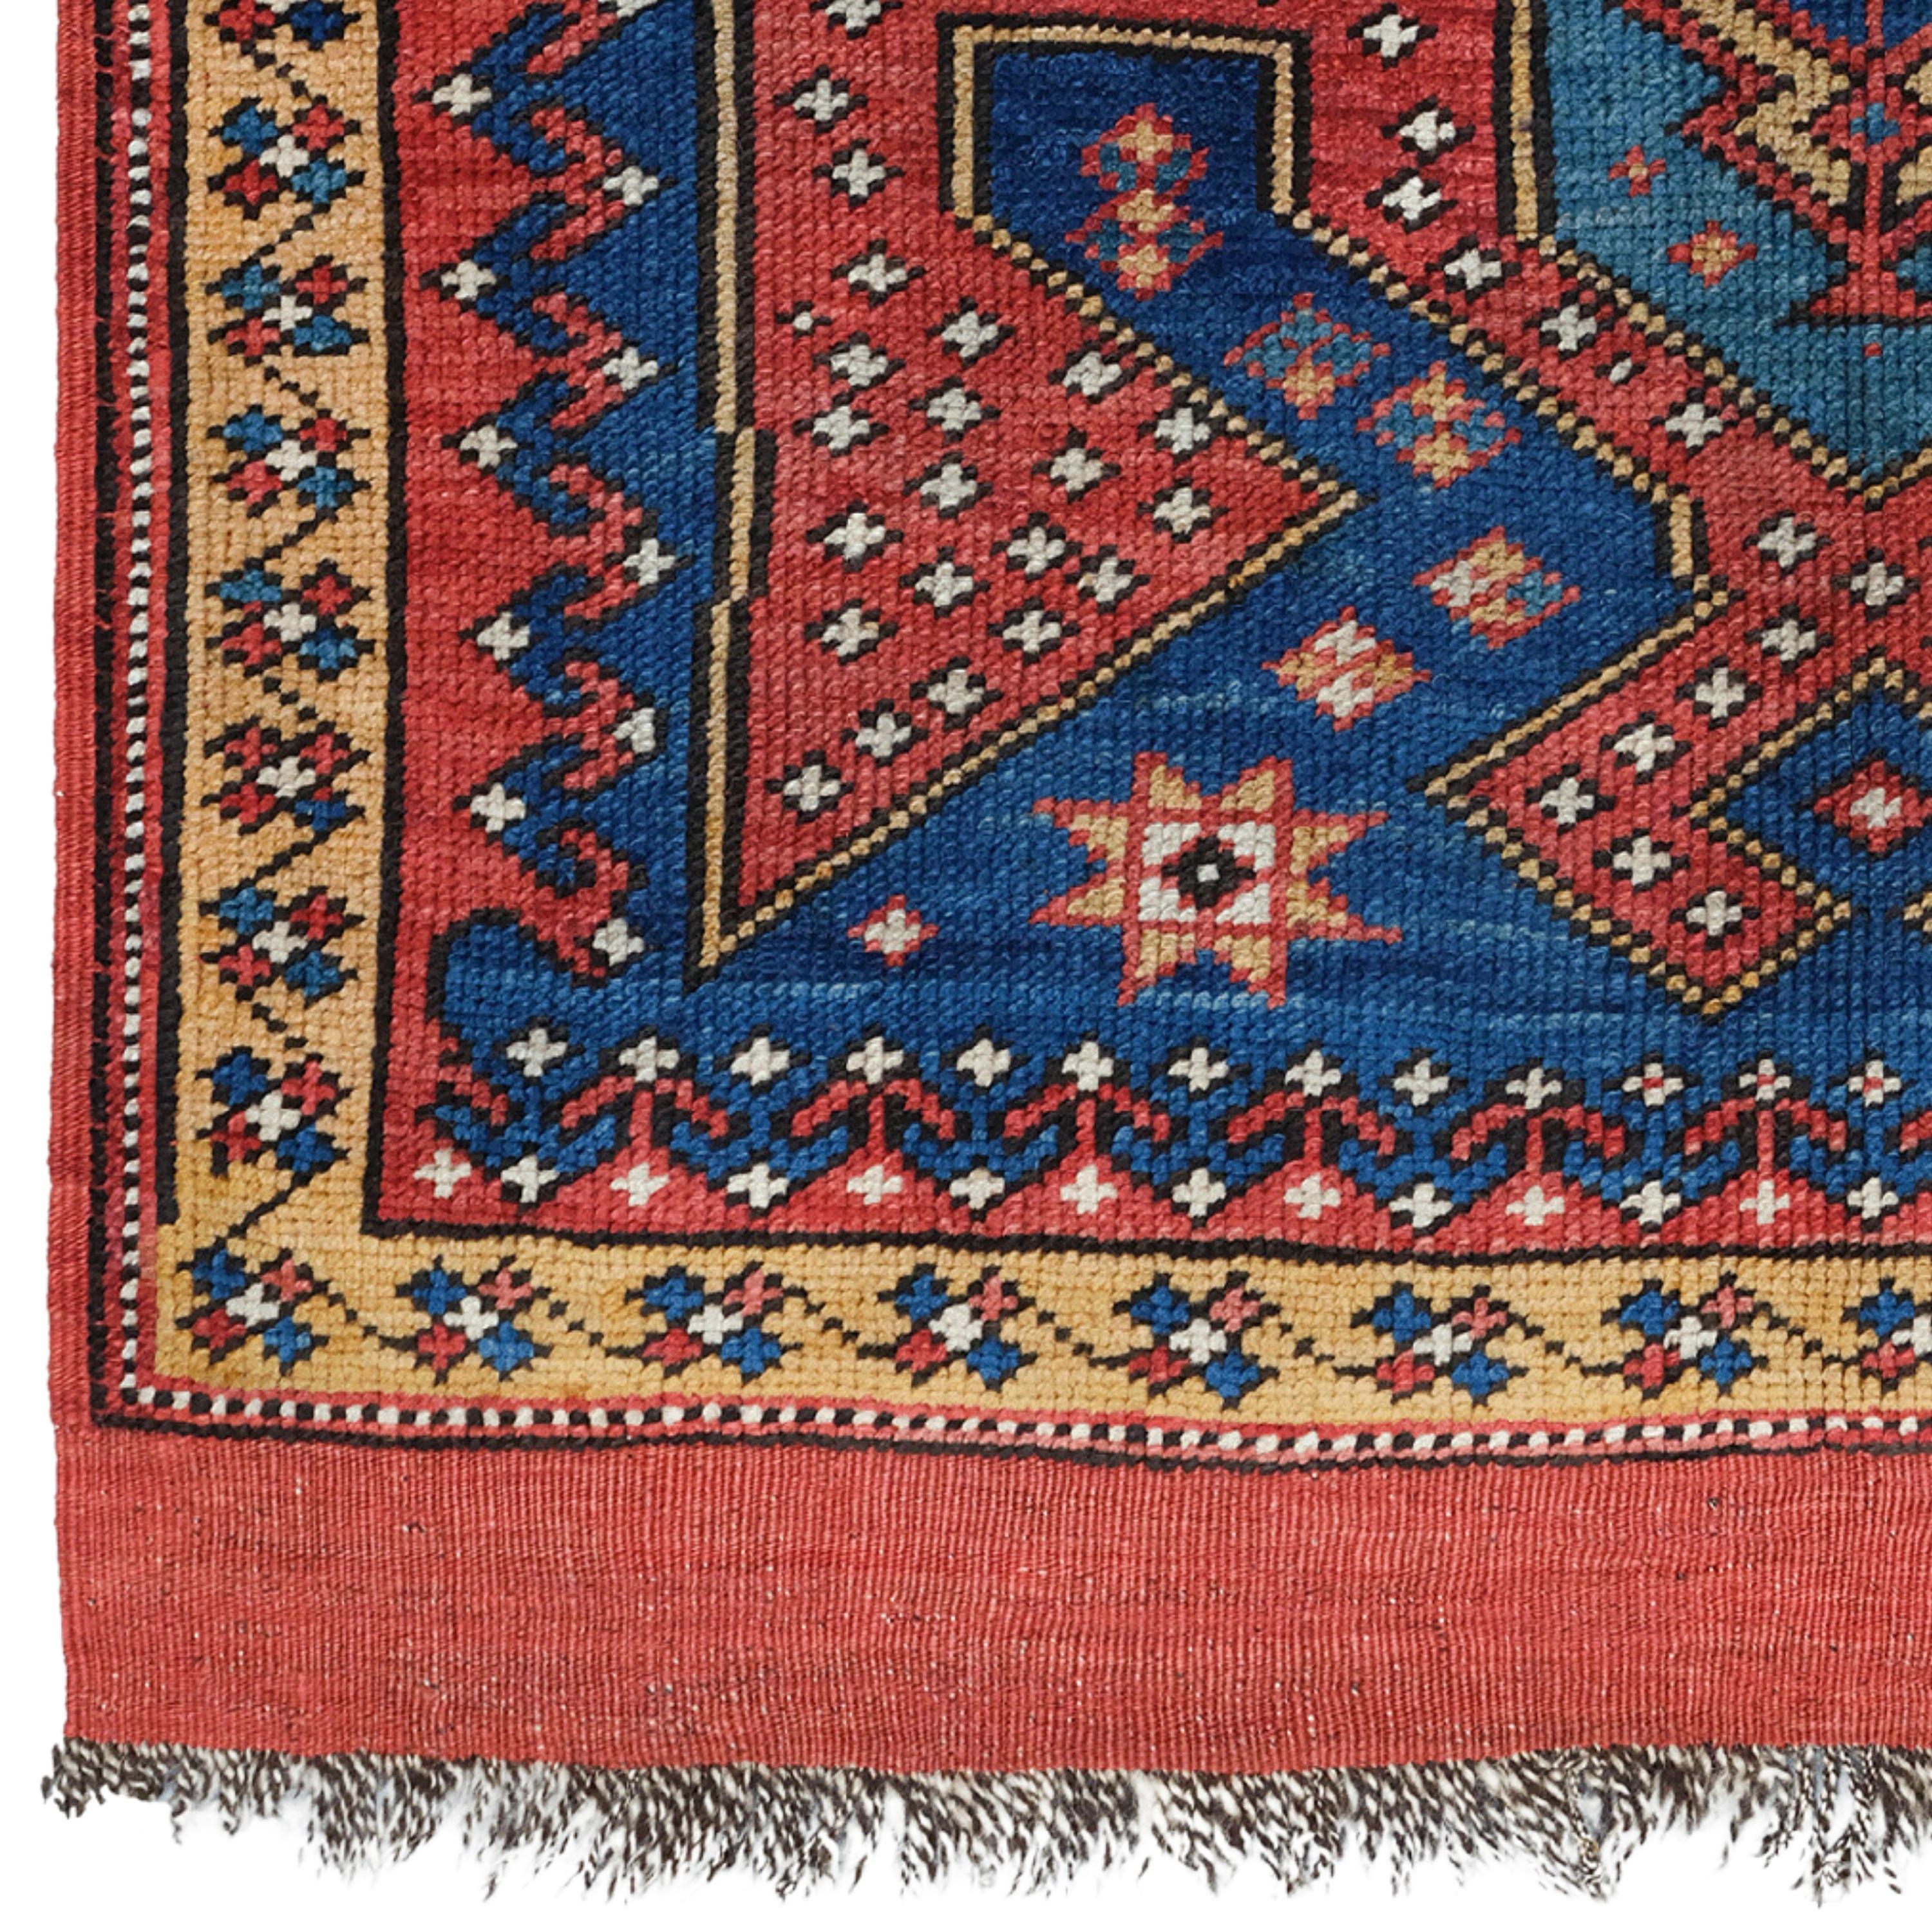 Middle of the 19th Century Anatolian Bergama Rug

In this small rug, a shield motif is surrounded by wide red dotted bands that develop into gables at both ends. It was probably woven in Kozak, which would explain the Caucasian style of the design.